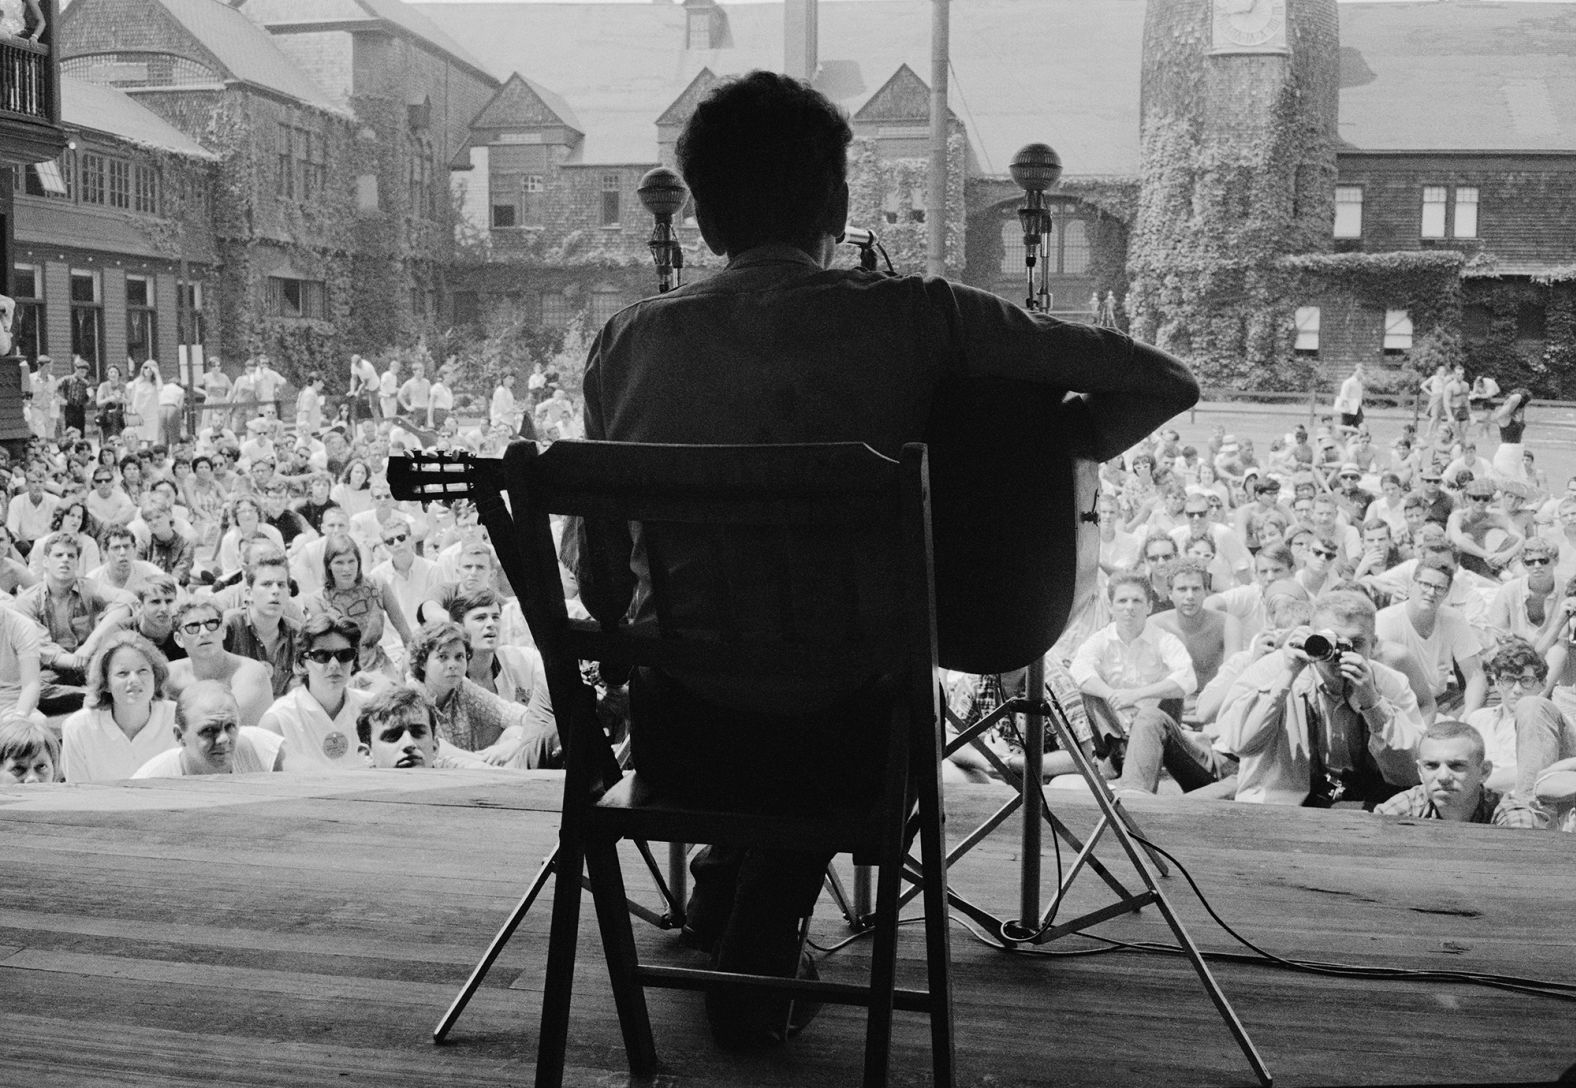 Dylan plays the guitar at the Newport Folk Festival in Newport, Rhode Island, in 1963. Dylan was known in his early career for playing the guitar and the harmonica, and for his distinctive vocal phrasing. 